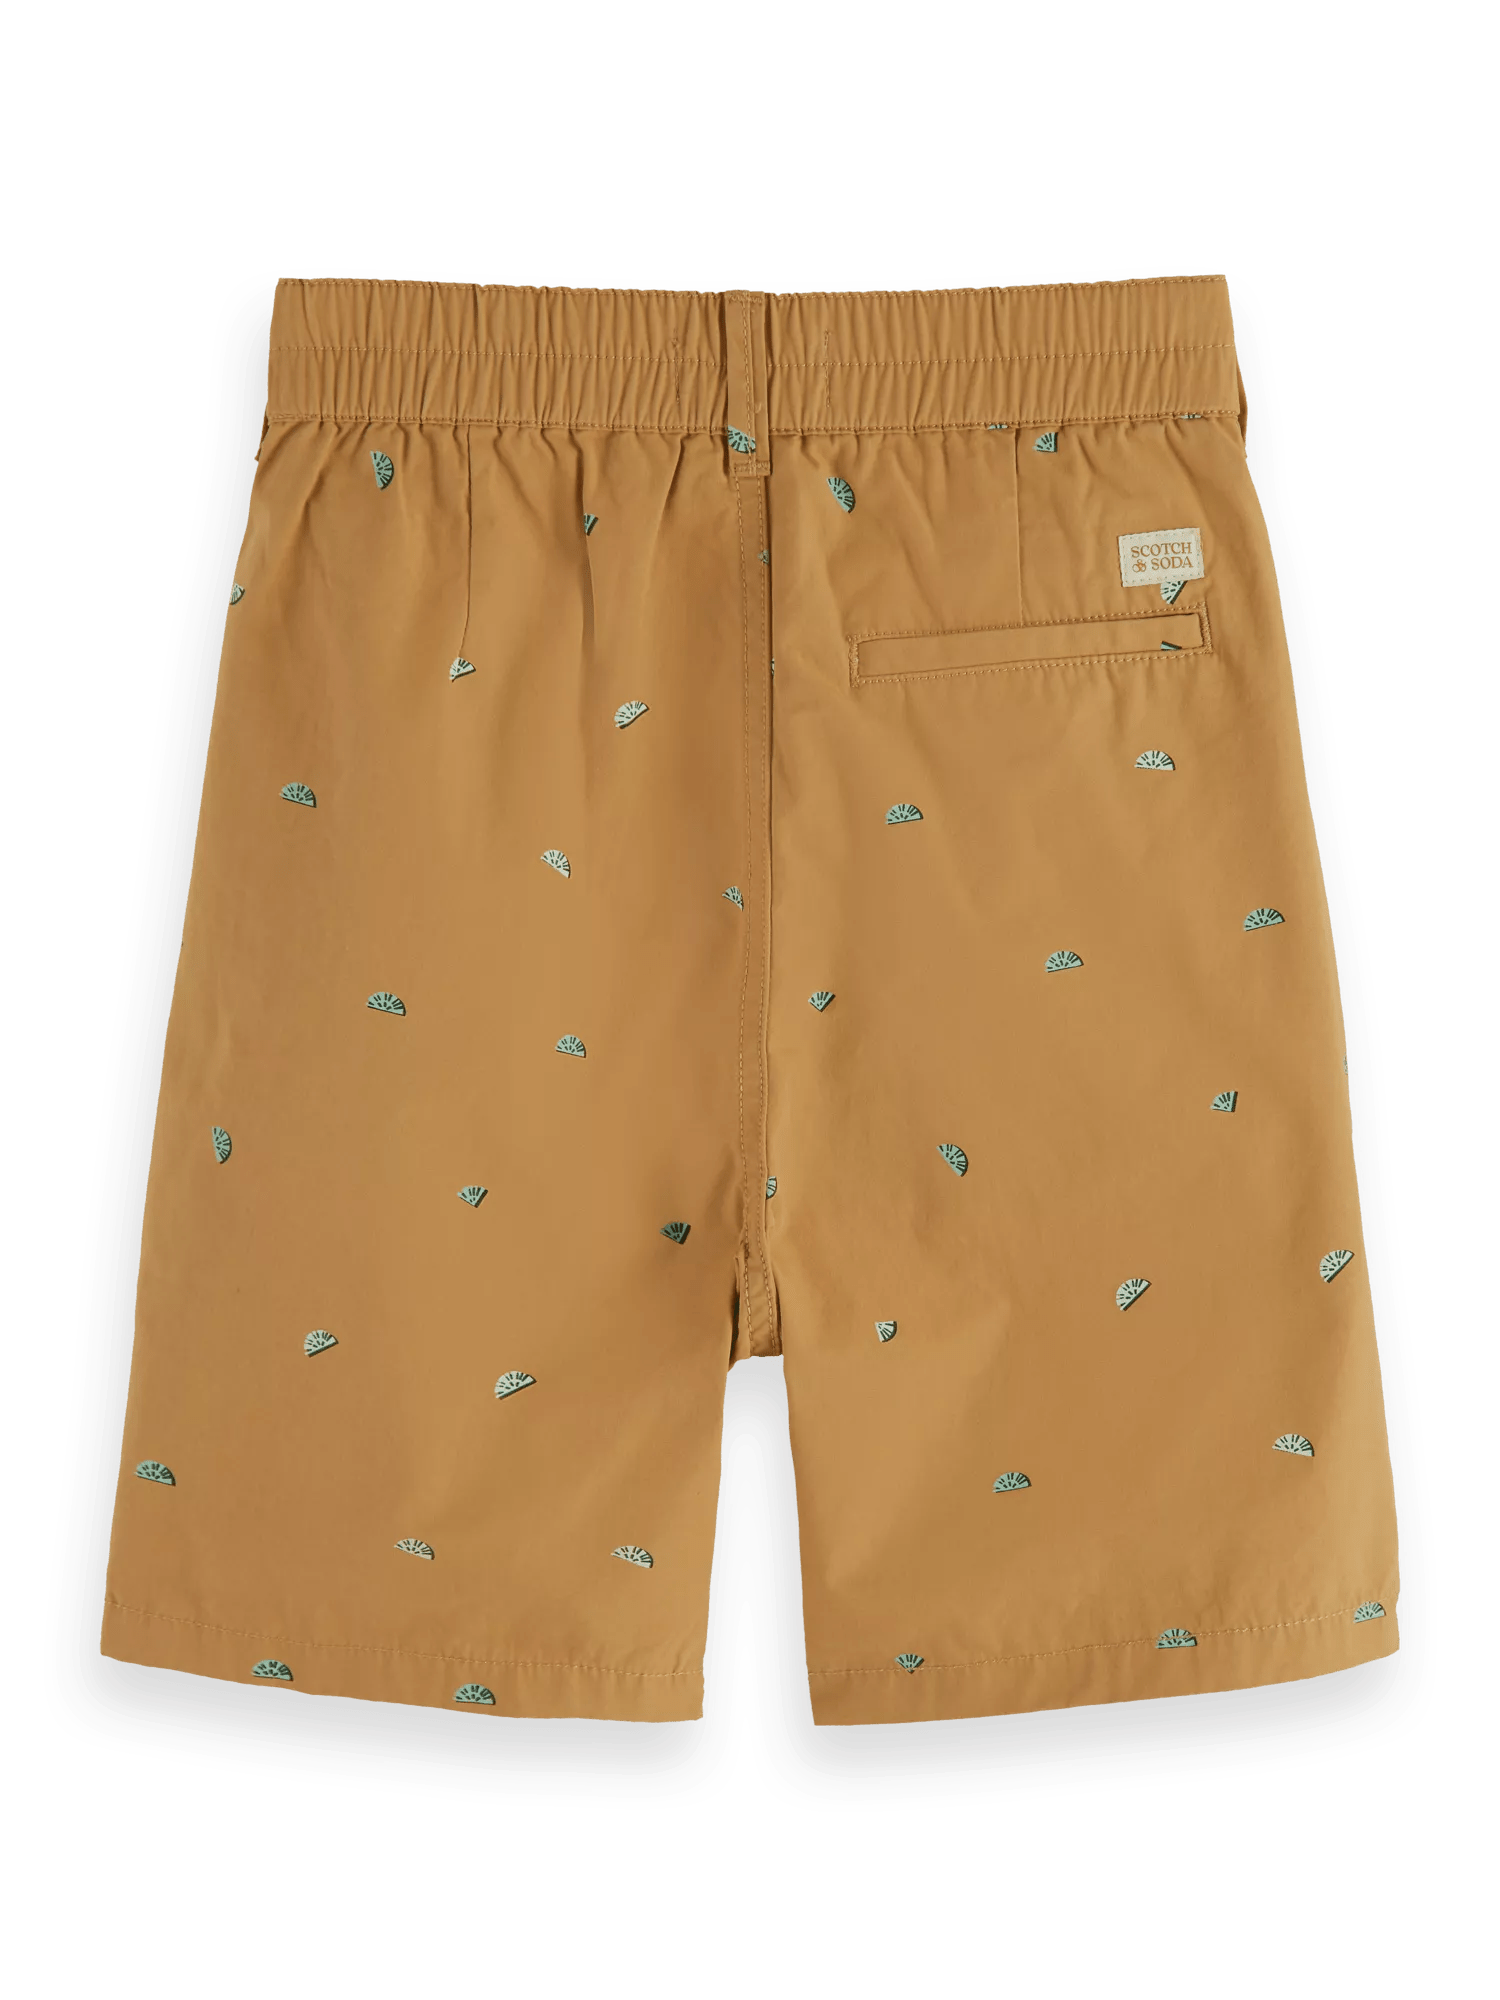 Scotch & Soda All-over printed peached chino shorts BCK